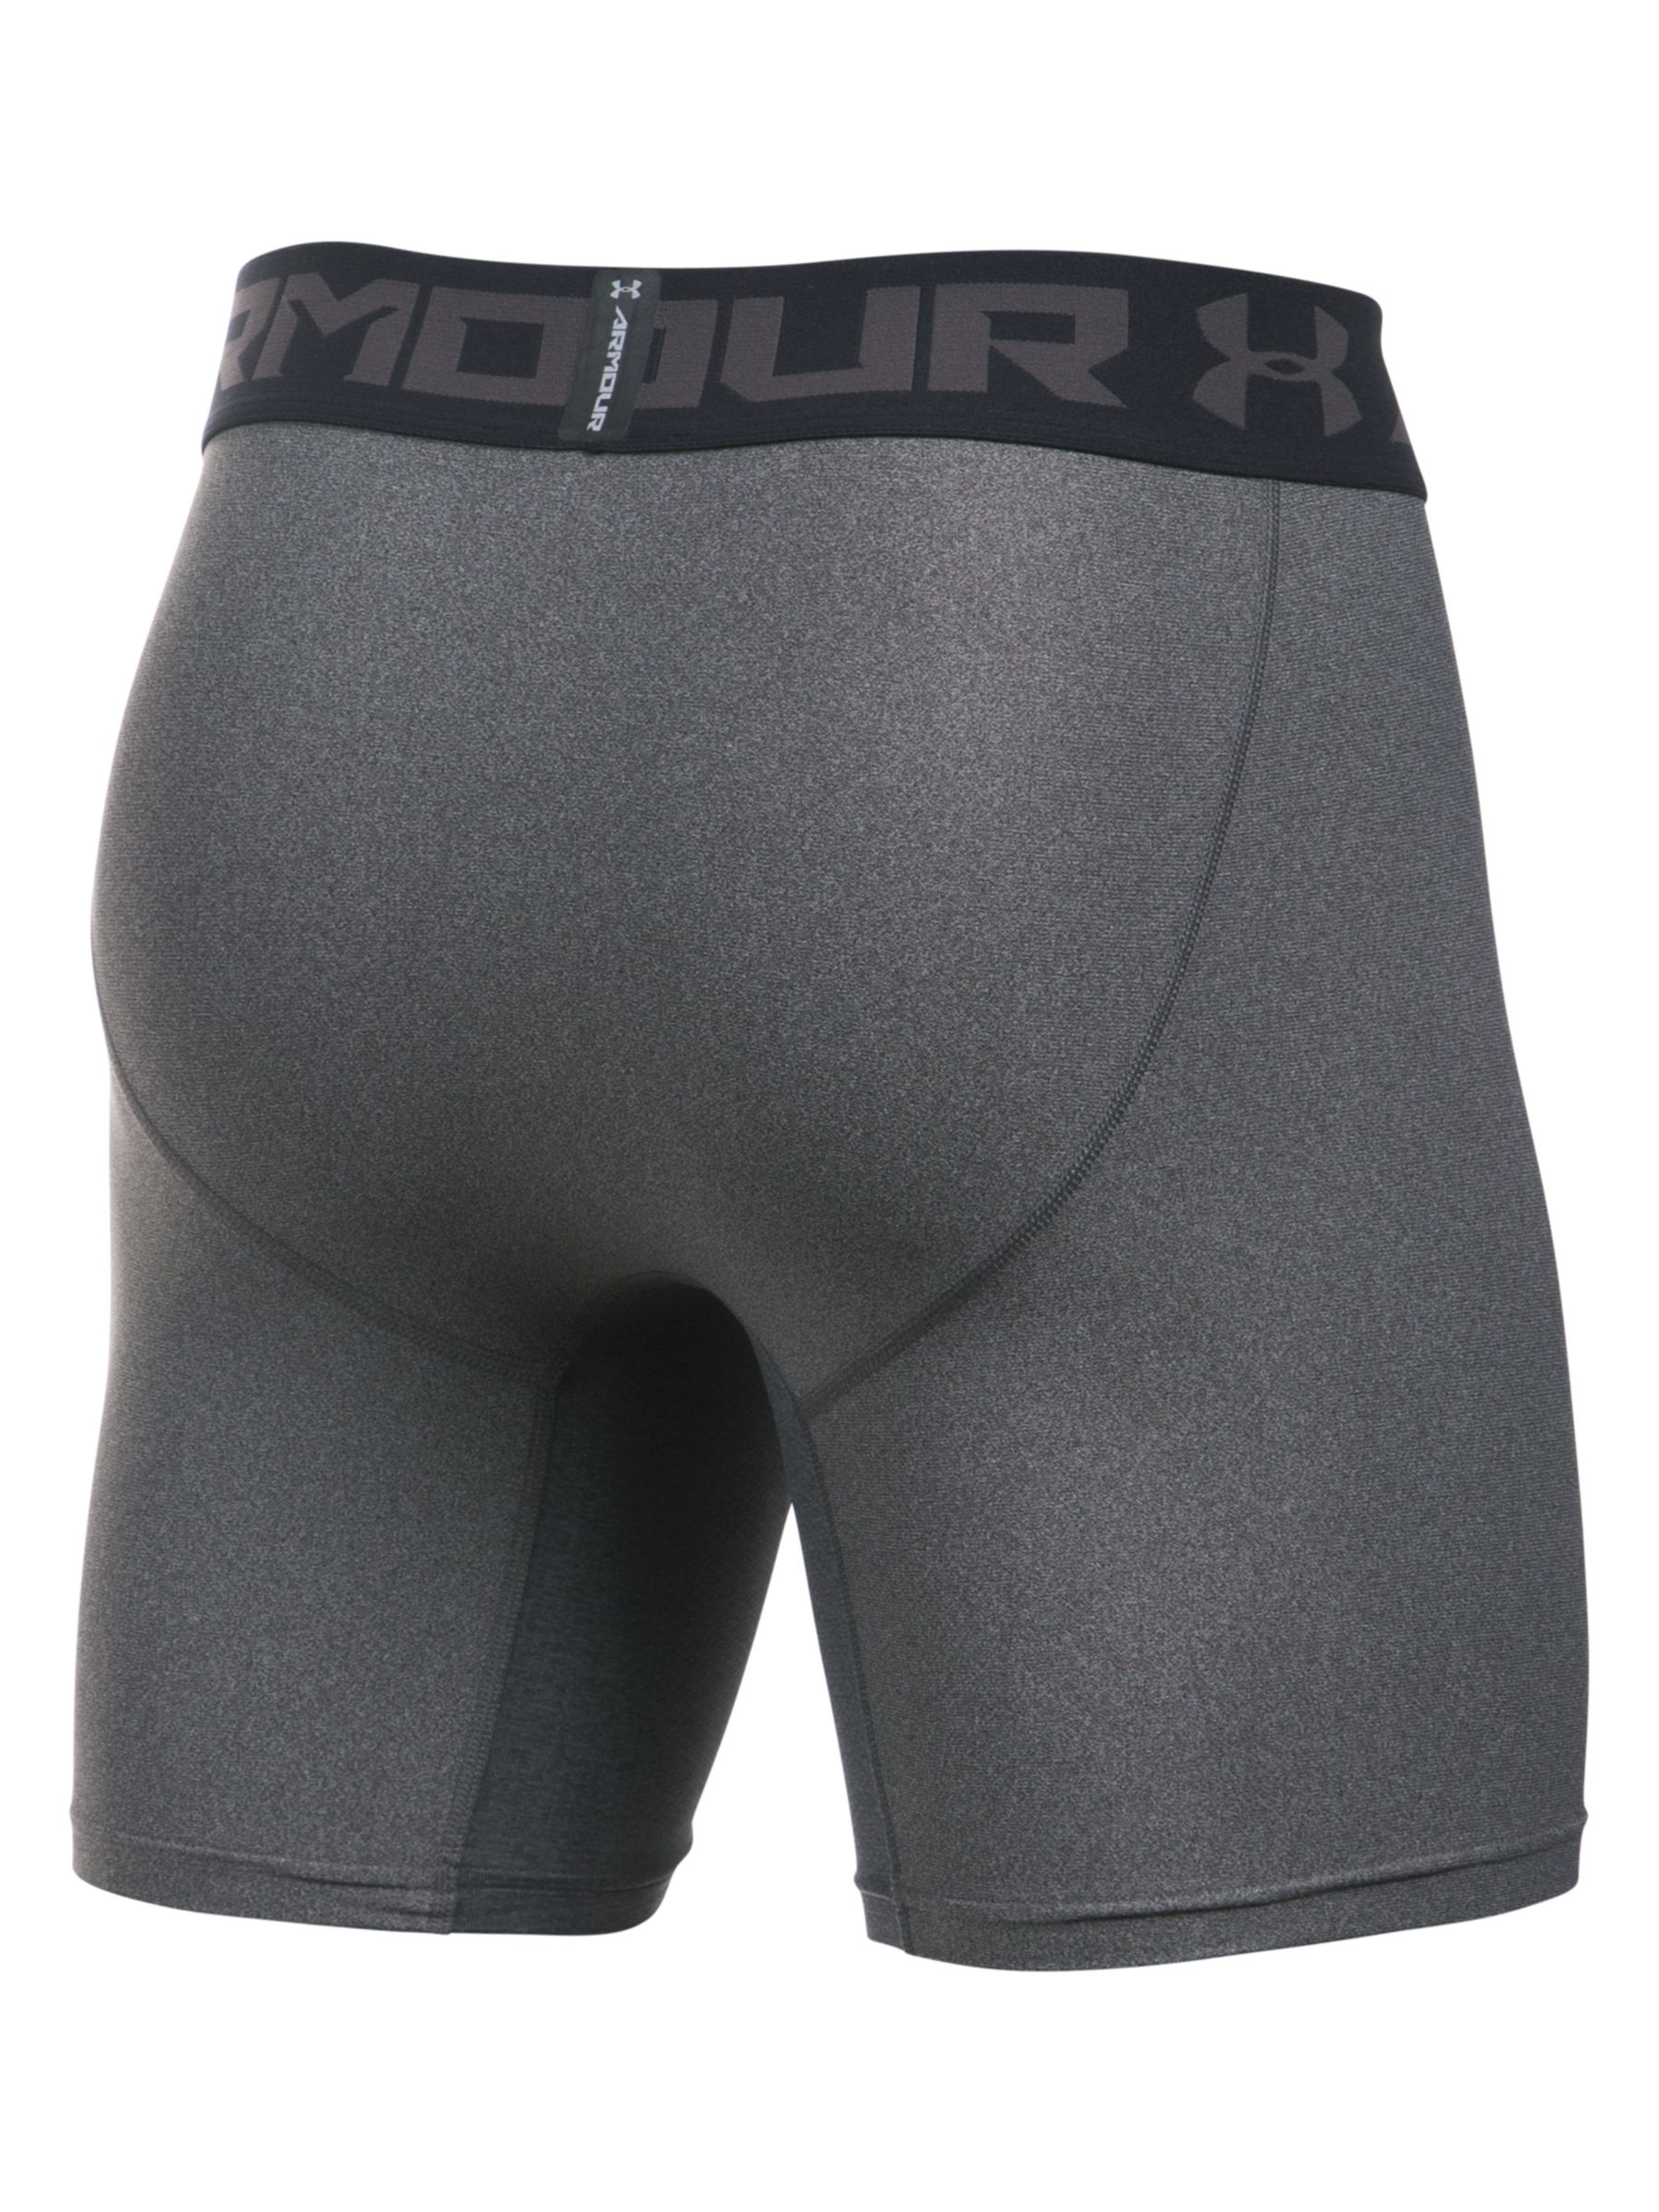 under armour compression shorts long